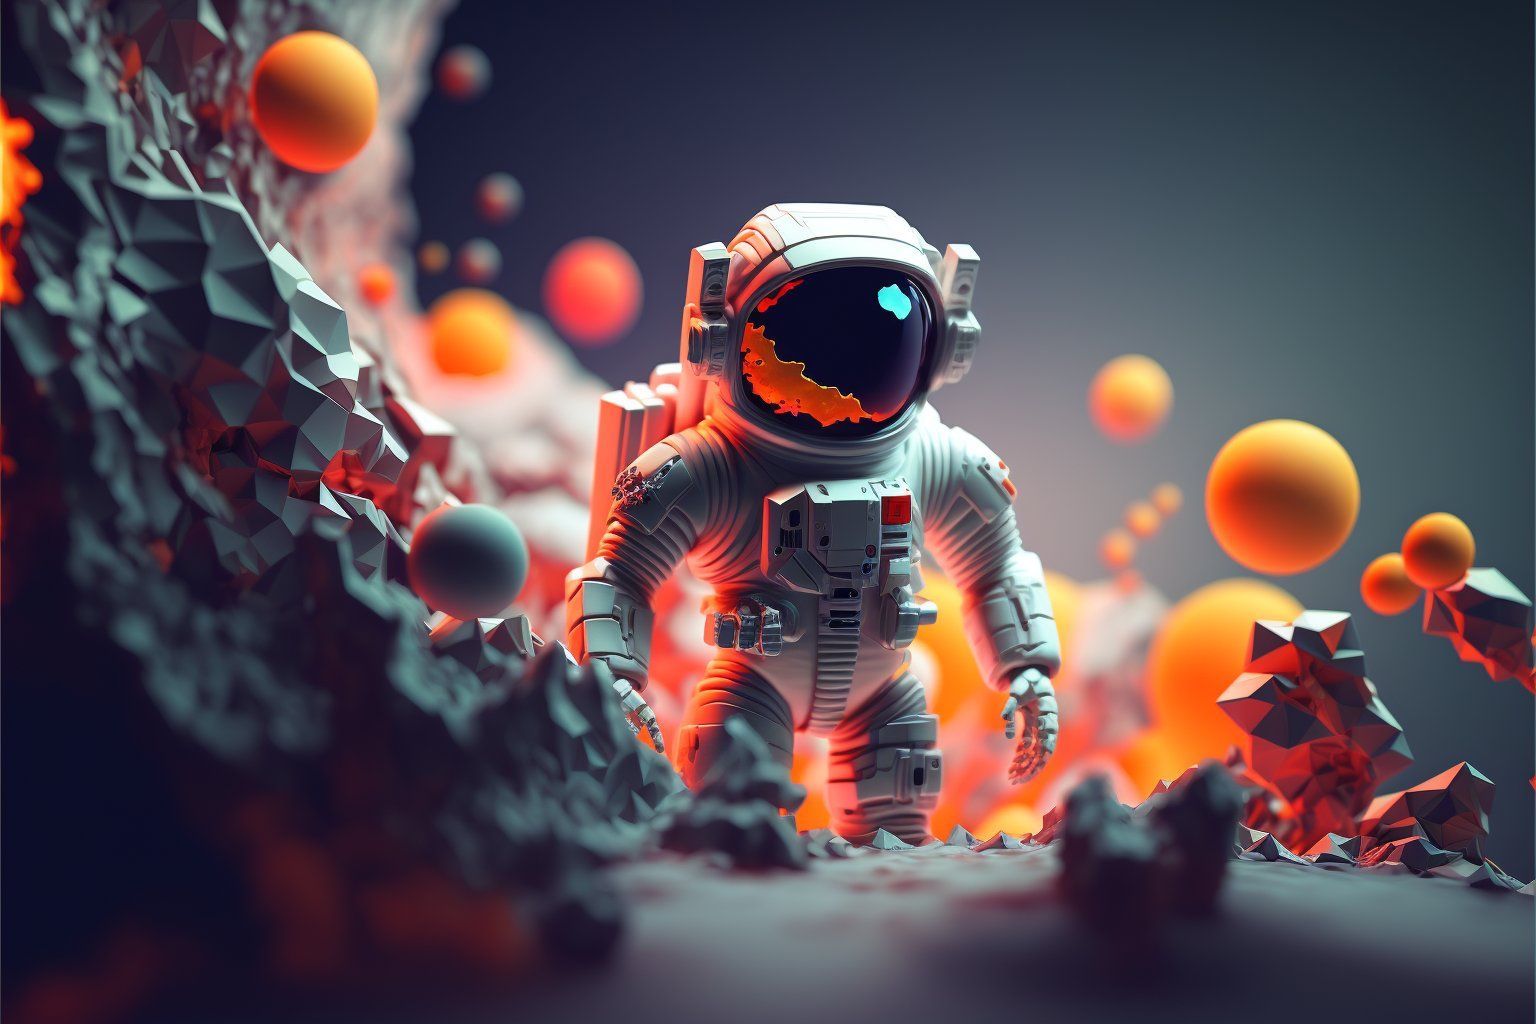 An astronaut in a space suit standing on a planet with an orange and grey atmosphere - Low poly